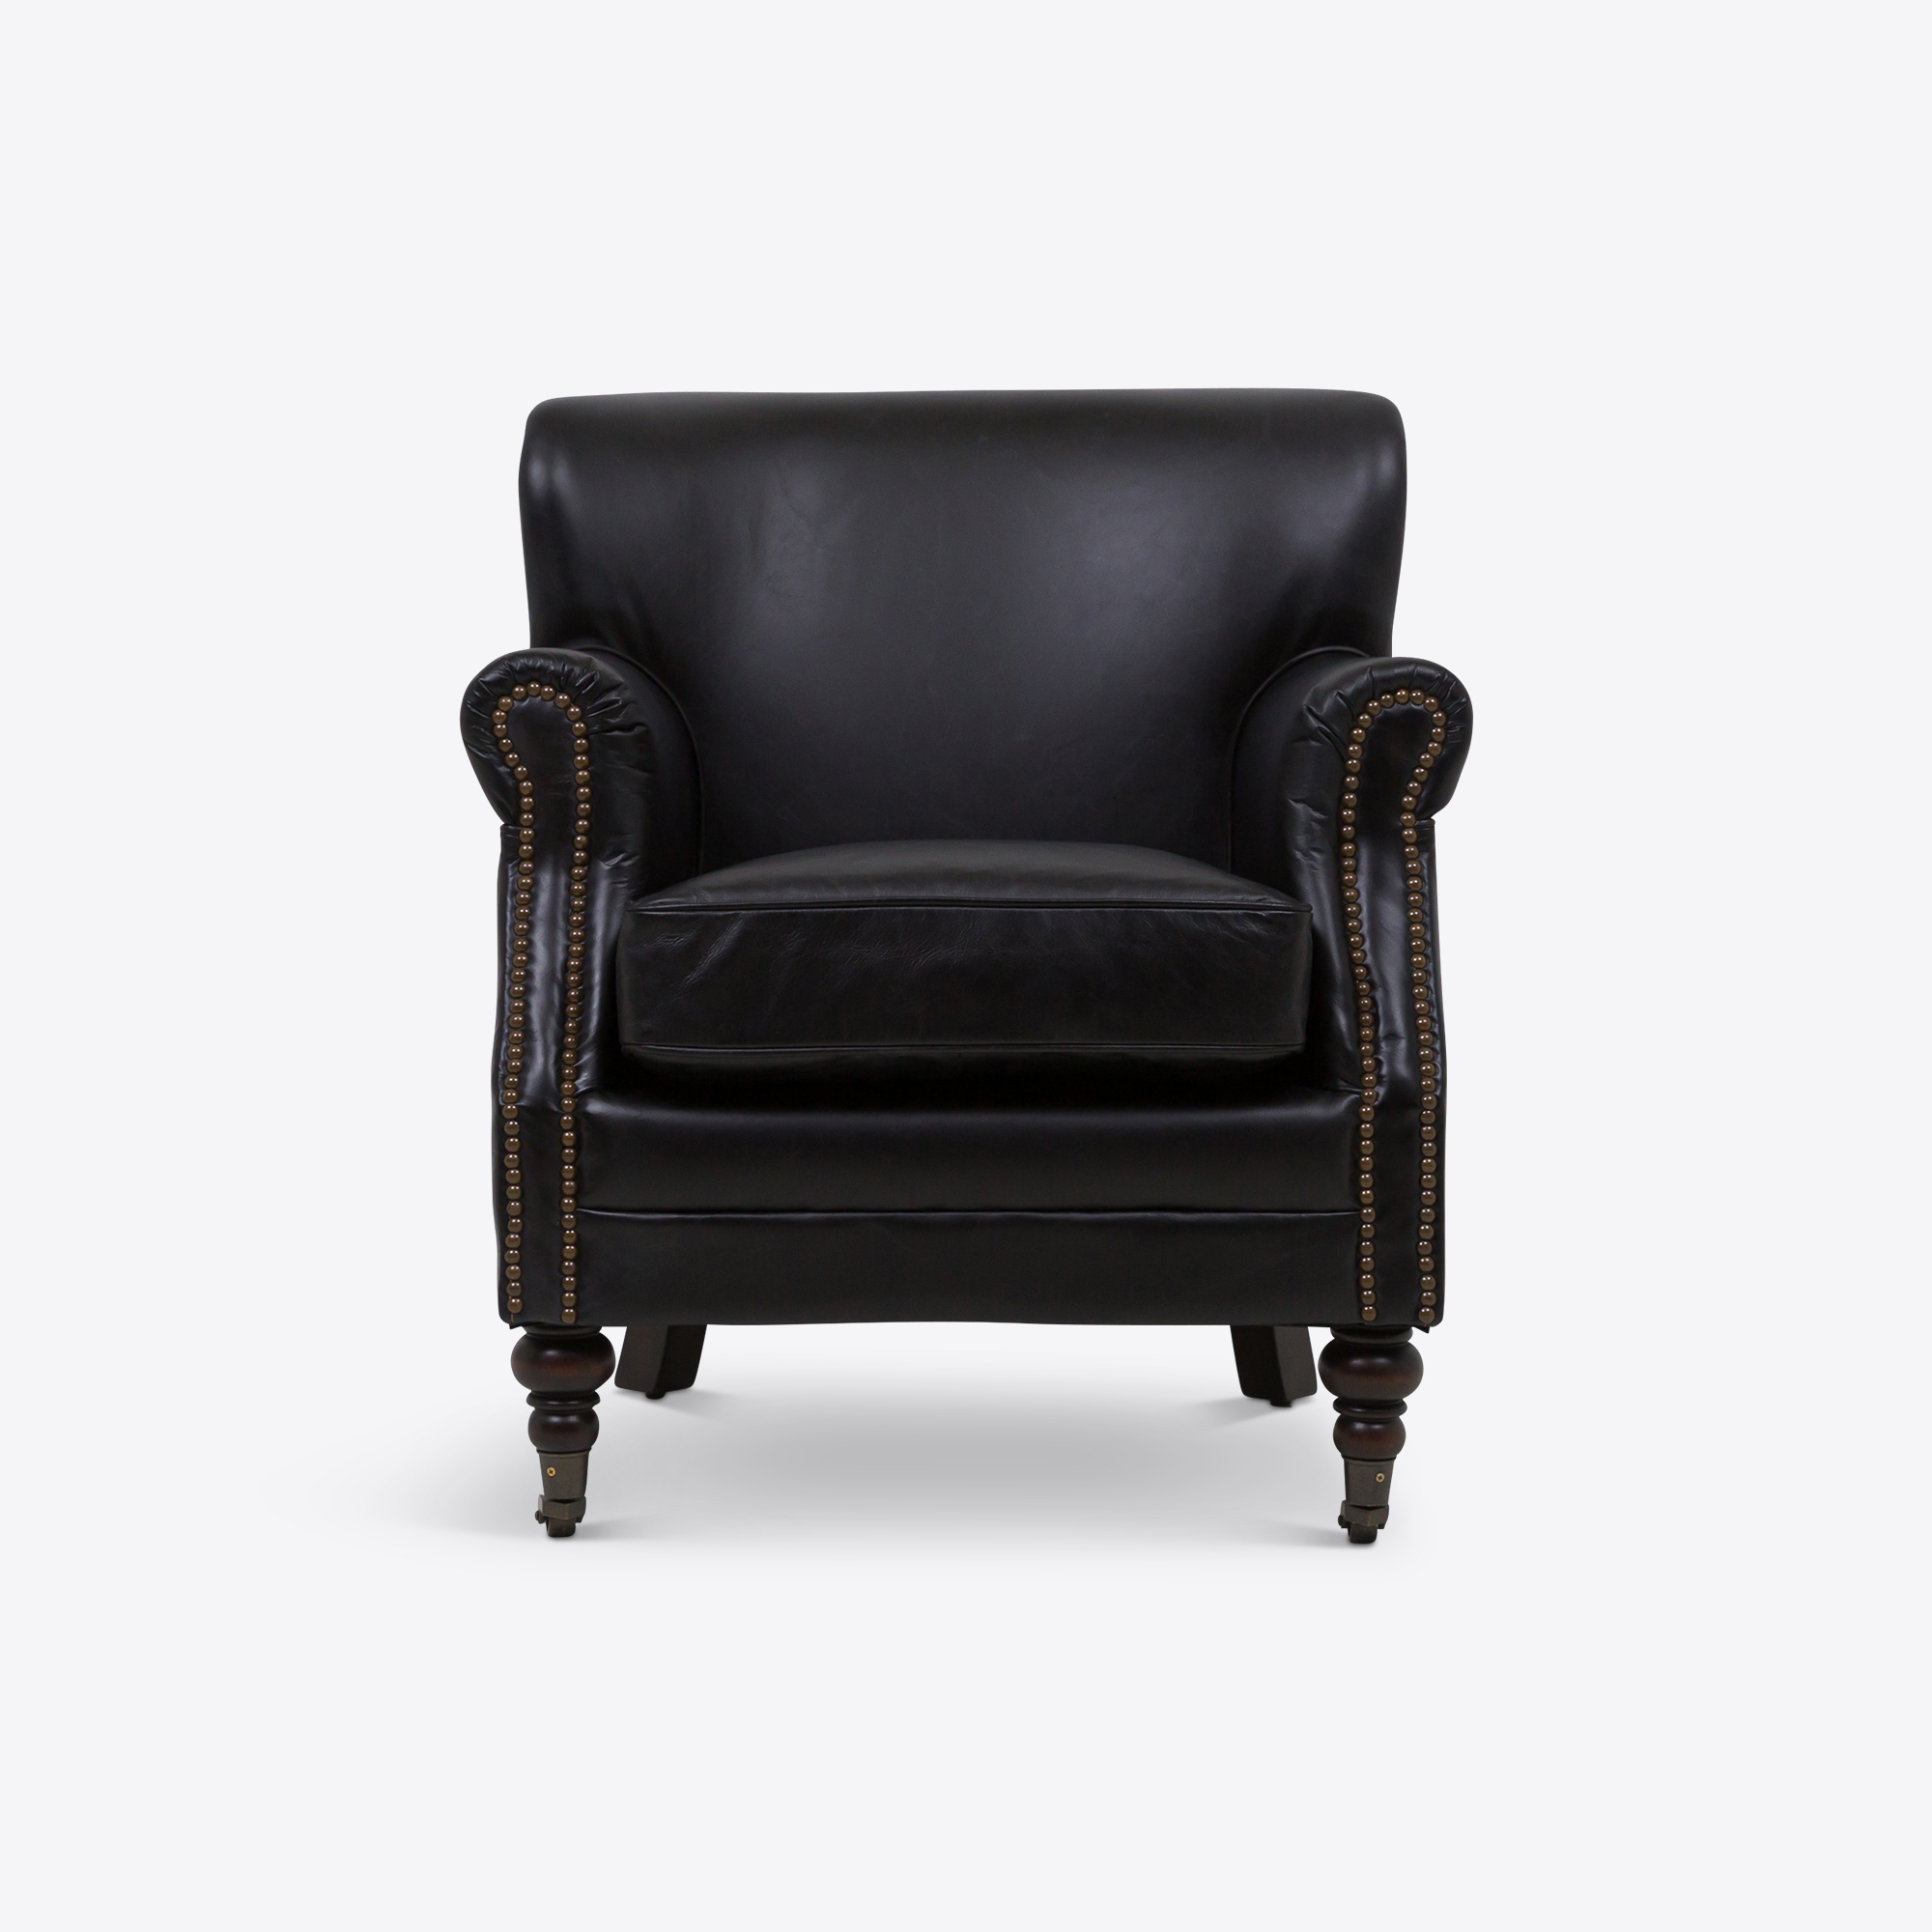 Tolworth small black leather armchair for bedrooms occasional chairs on castors